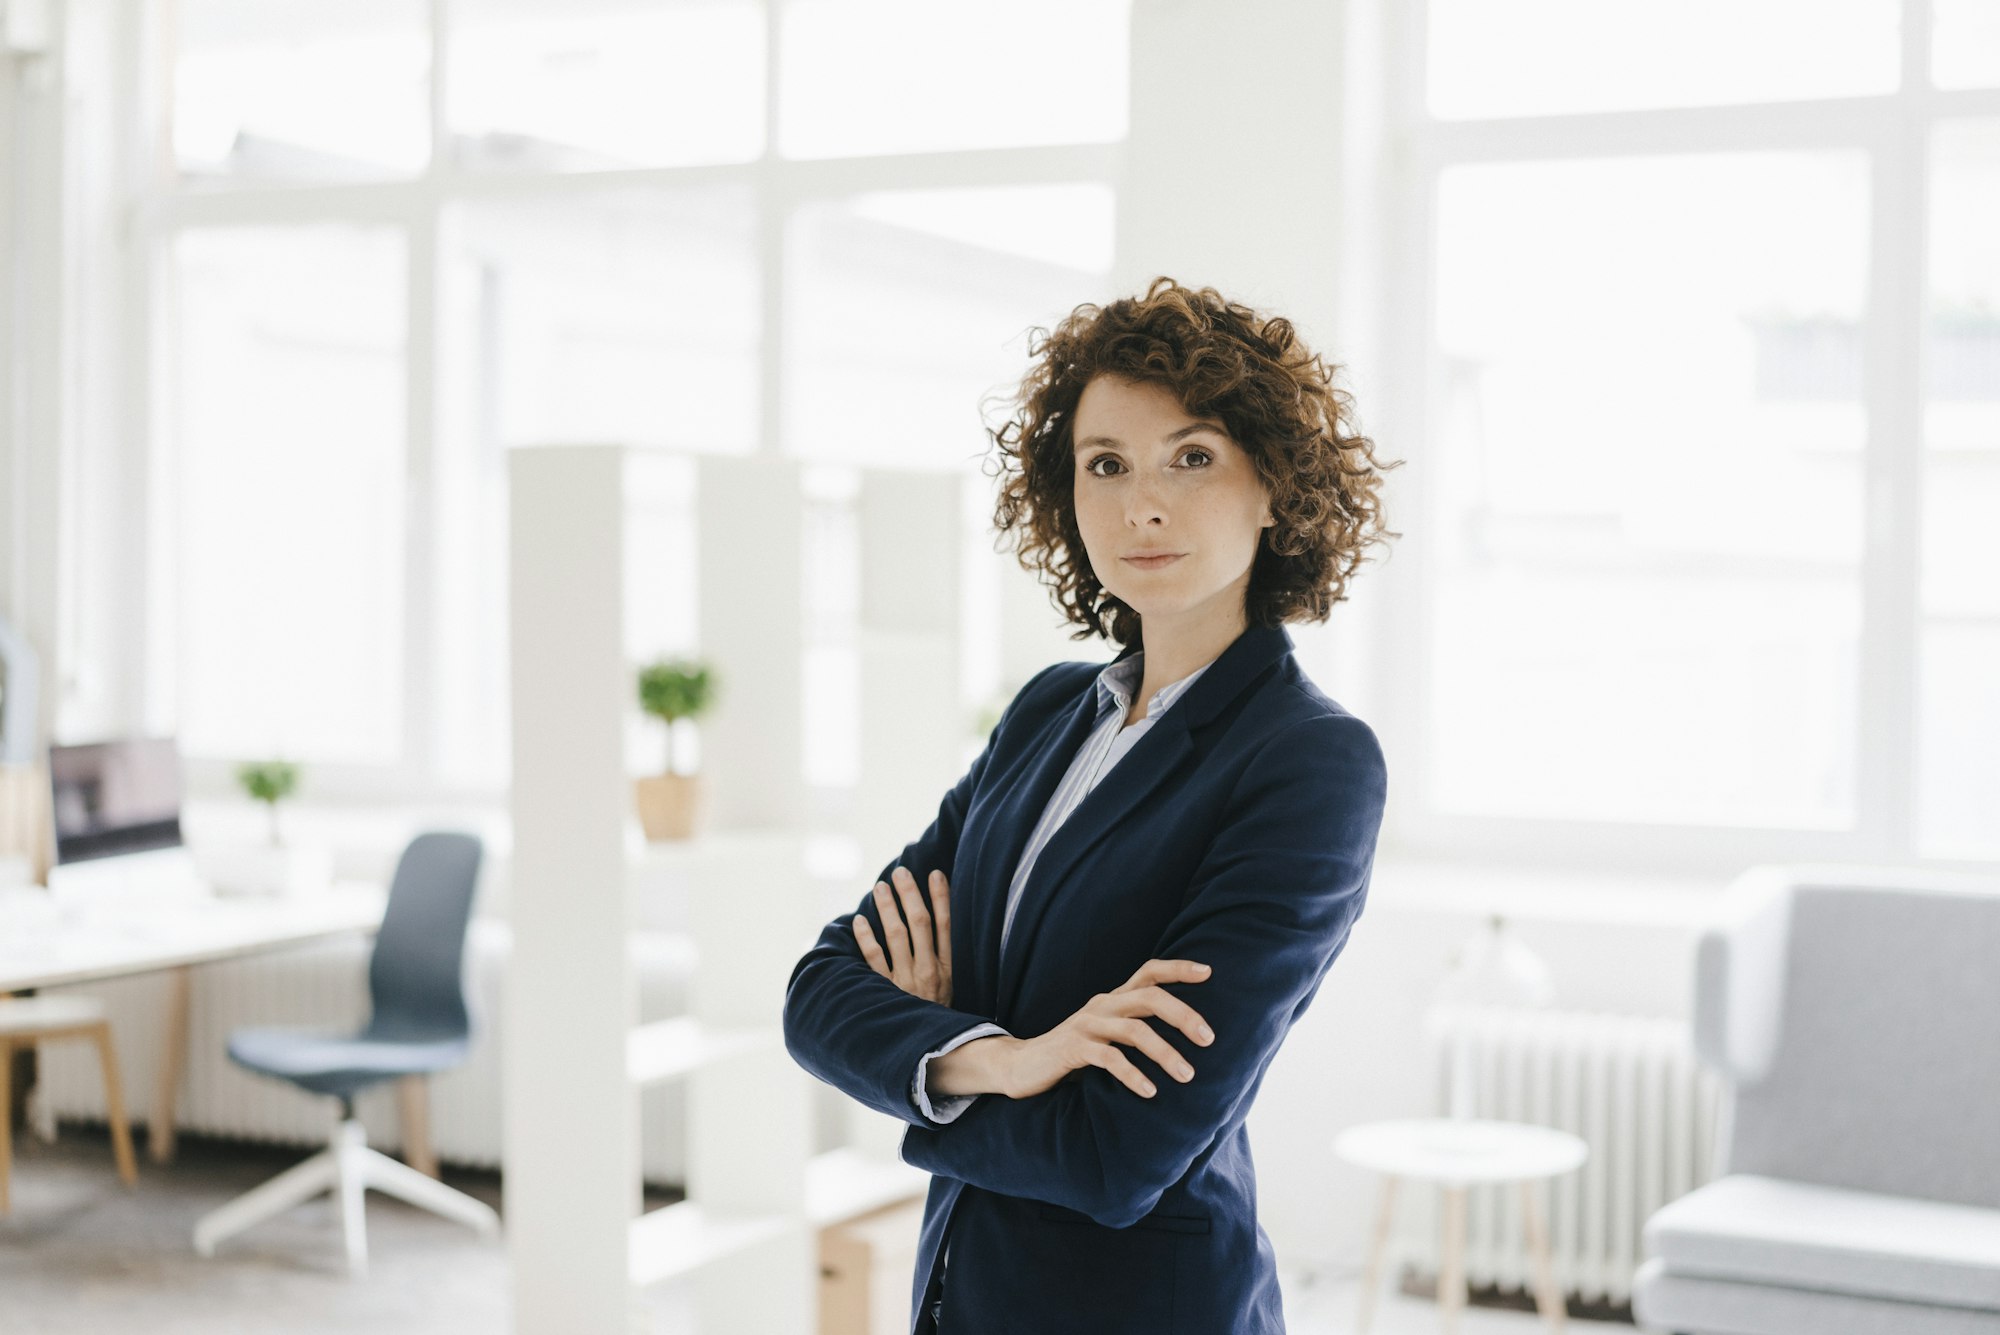 Businesswoman standing in her office with arms crossed